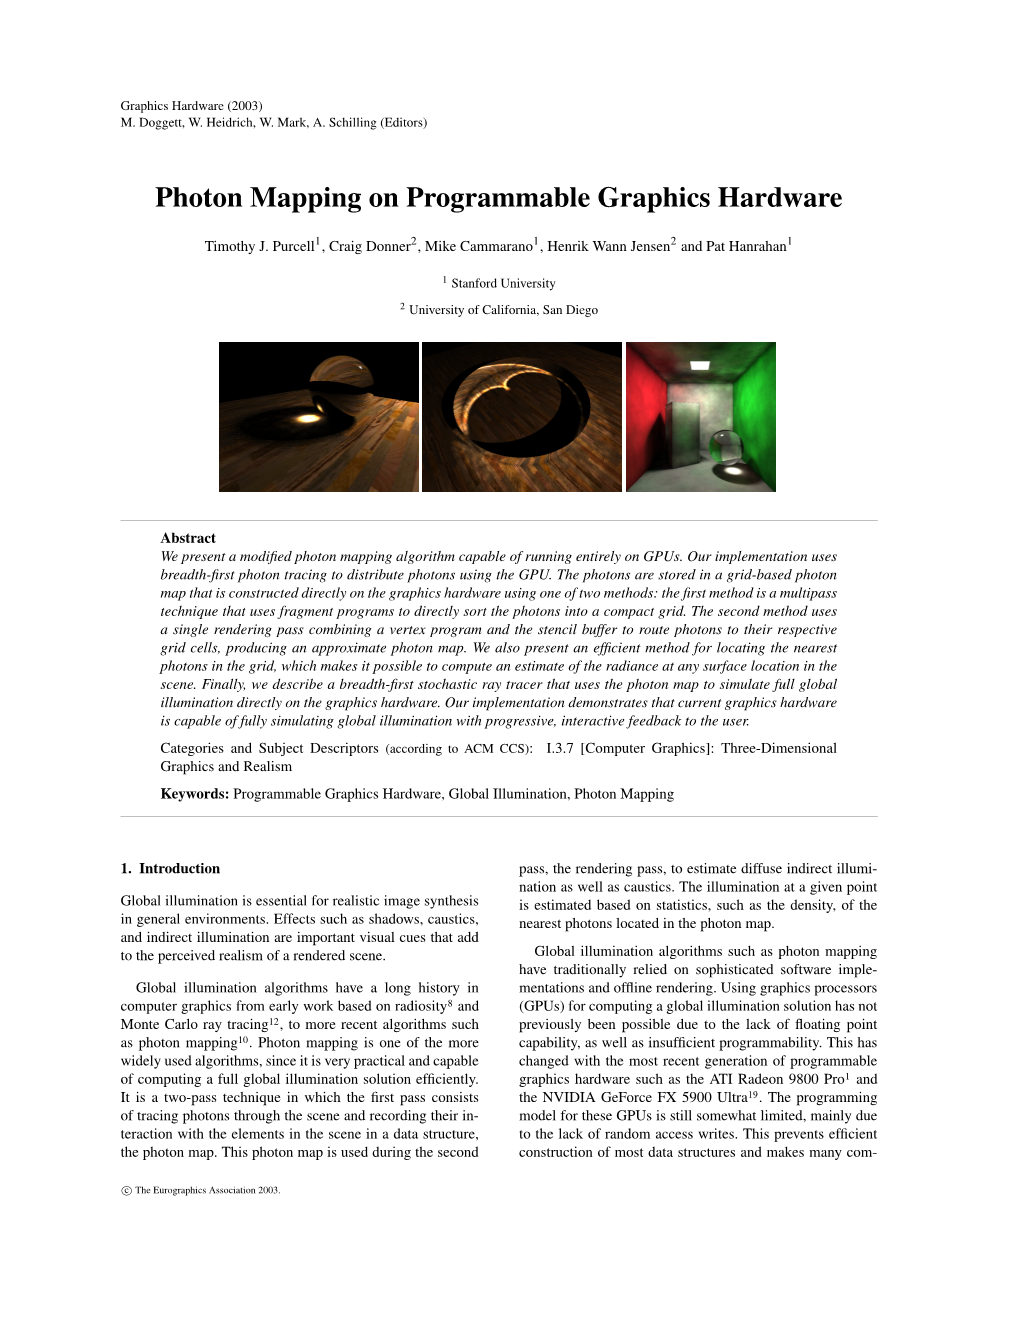 Photon Mapping on Programmable Graphics Hardware